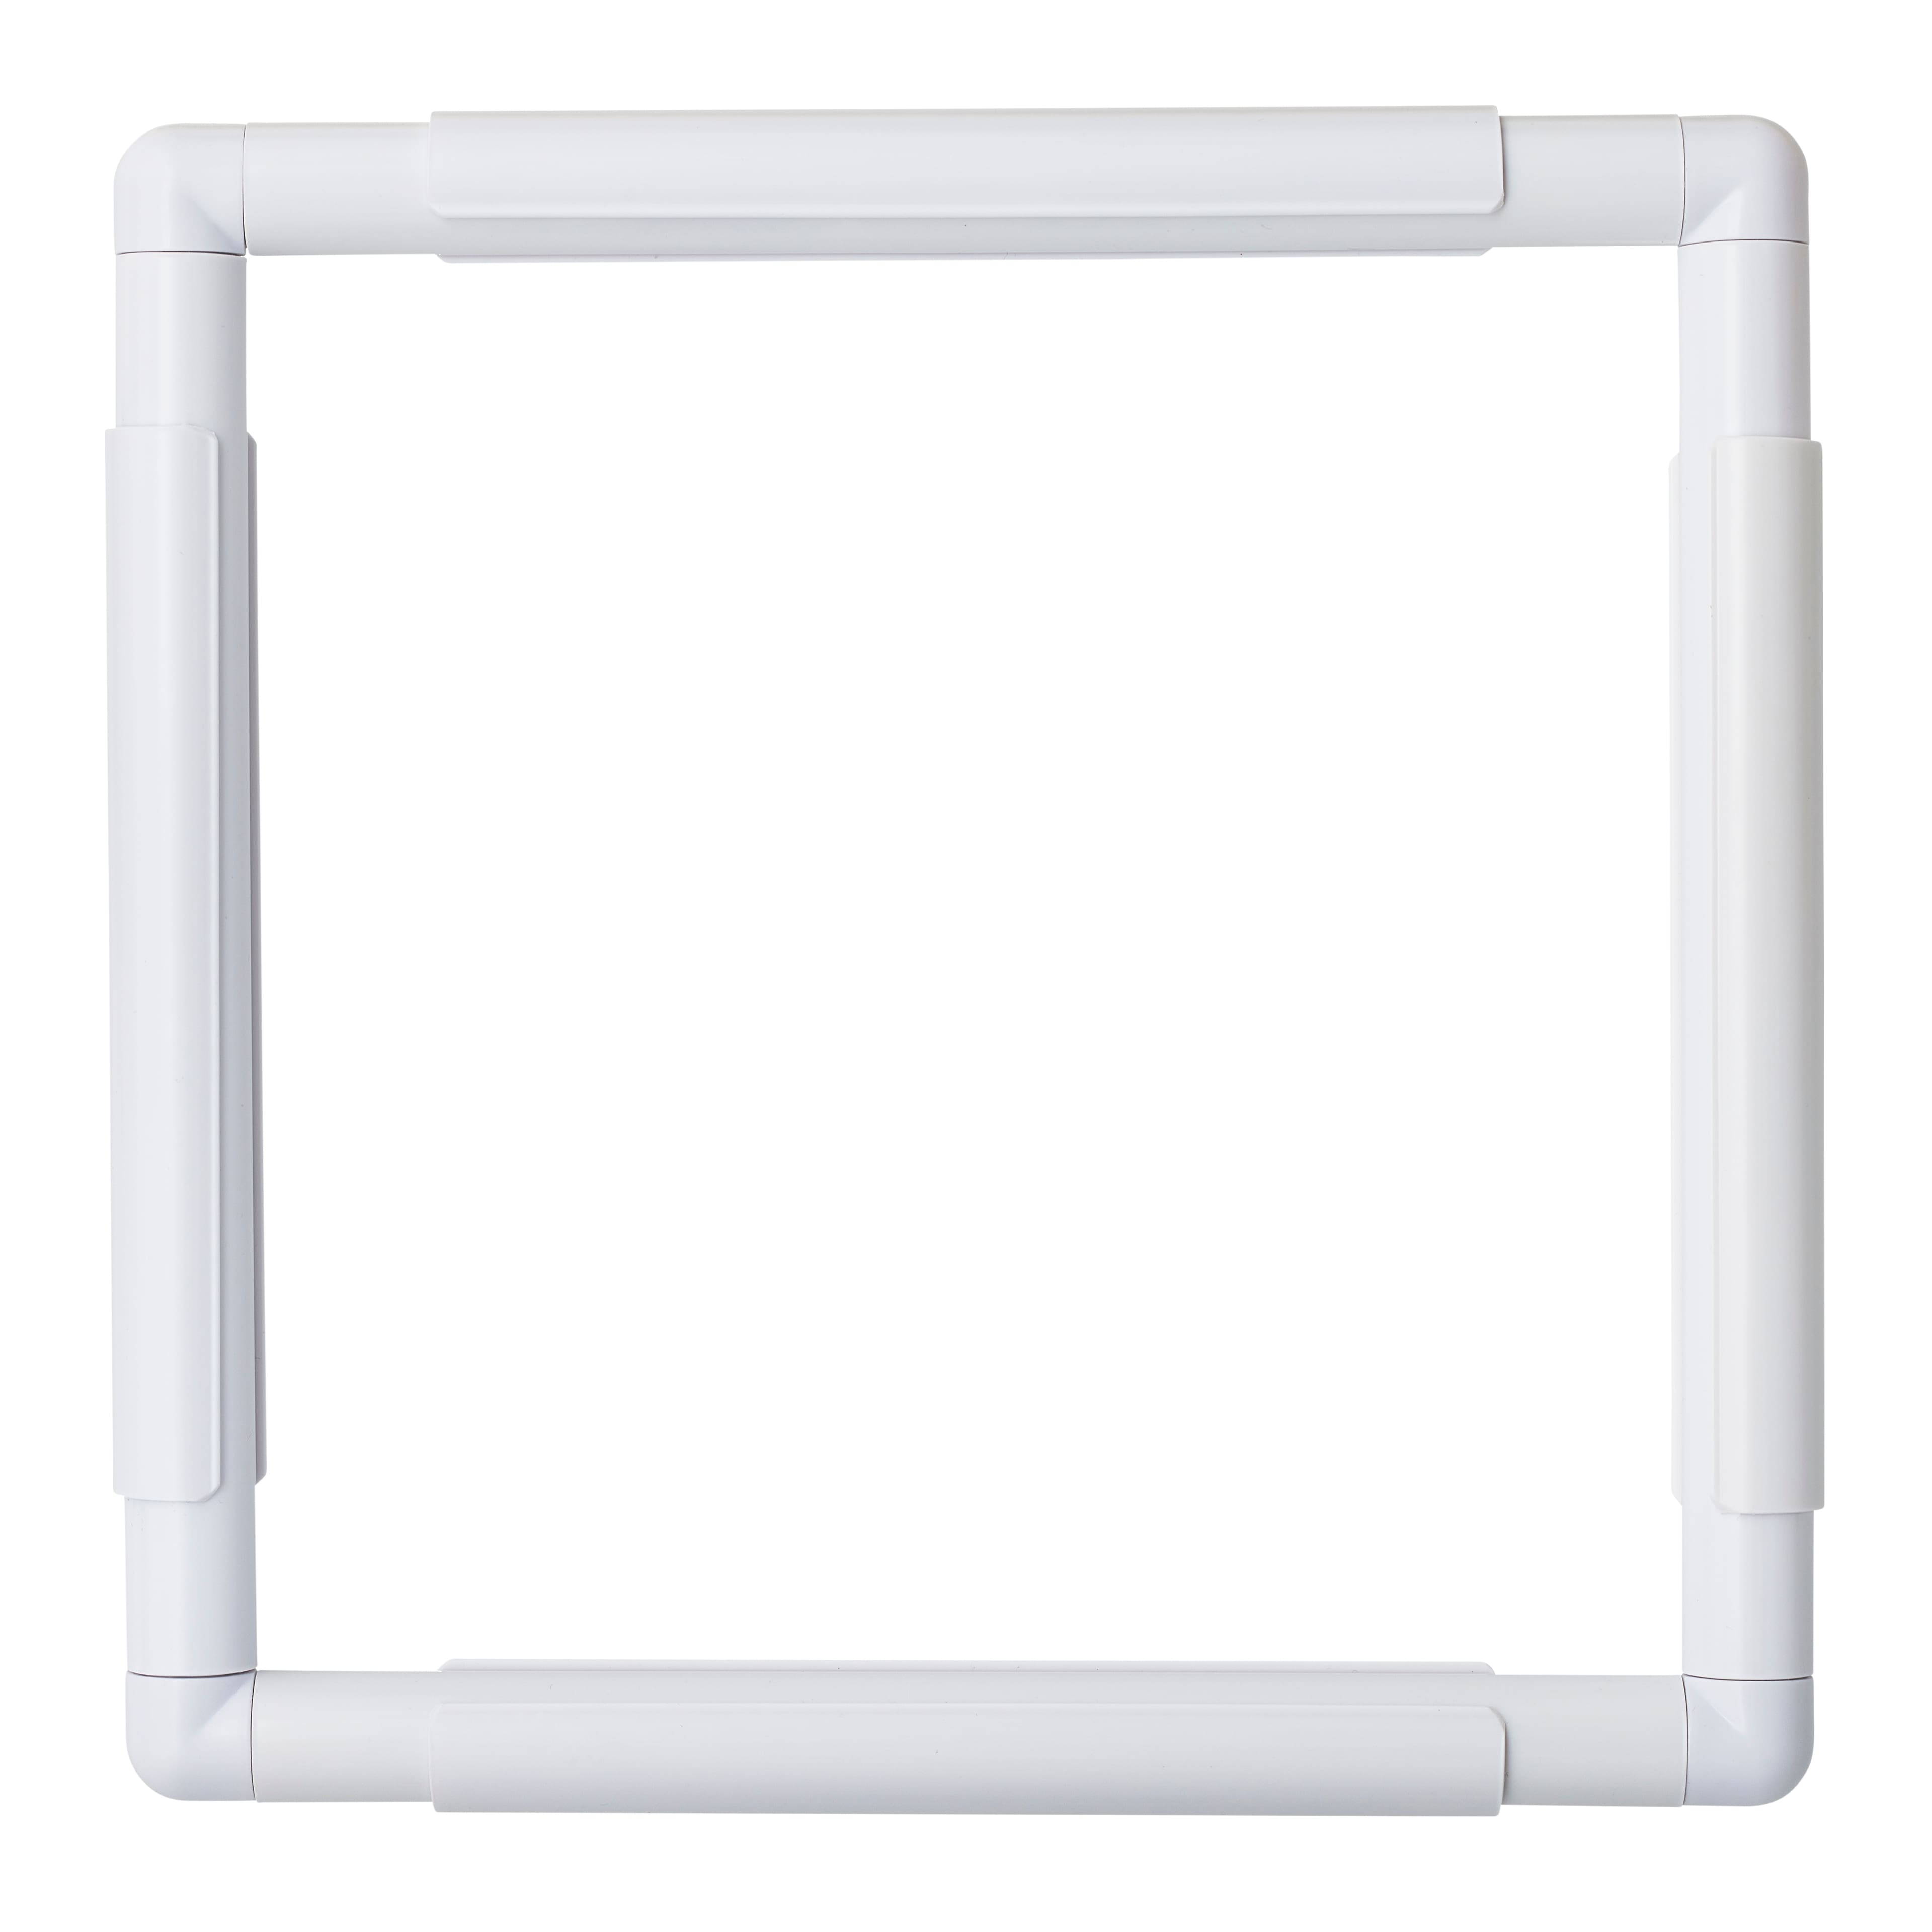 Square Wooden Cross Stitch Frames for sale